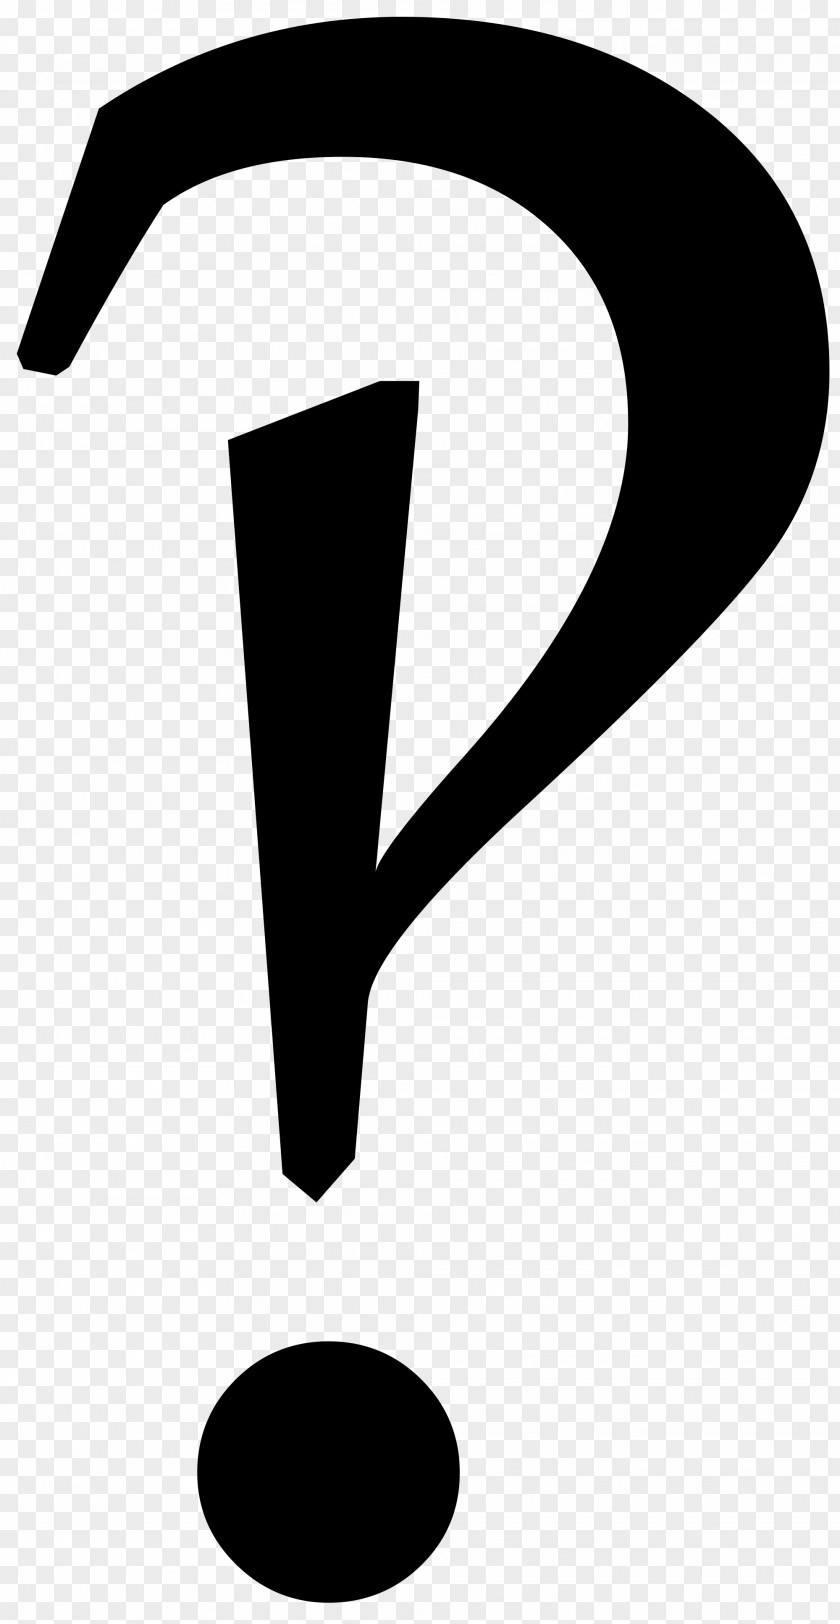 Typo Vector Interrobang Exclamation Mark Question Punctuation Rhetorical PNG